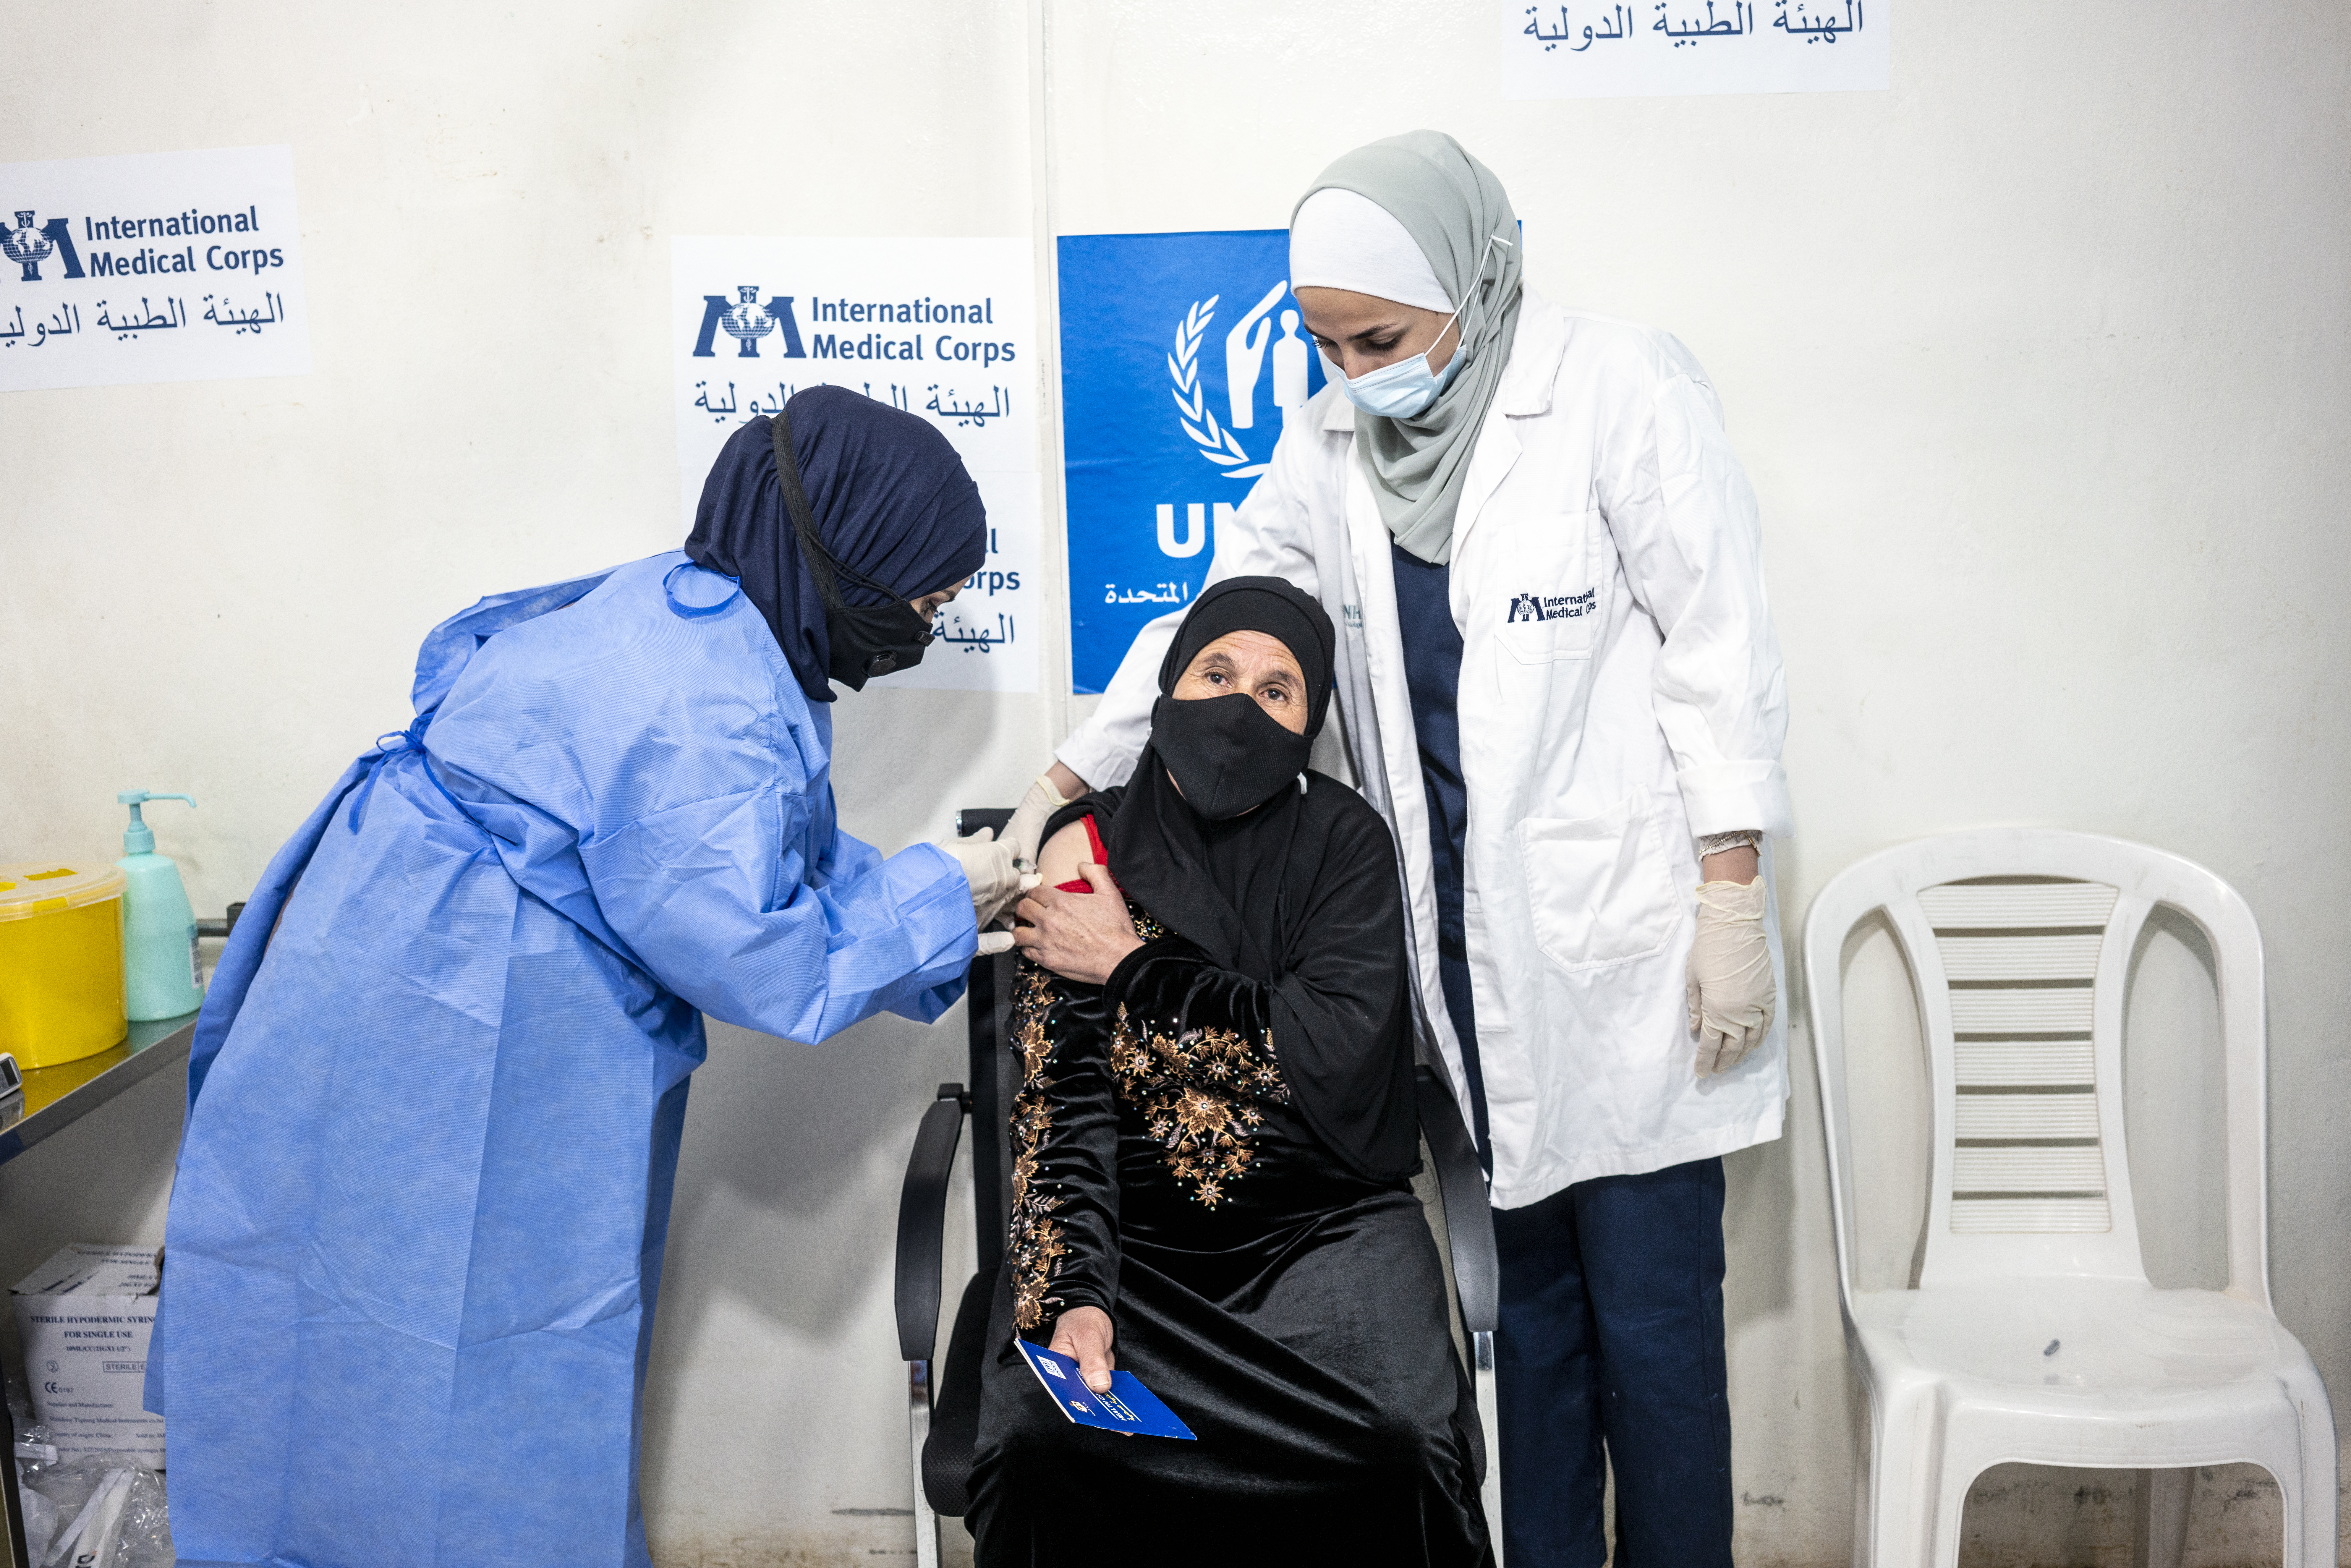 In Jordan, refugees are eligible for COVID-19 vaccination along with Jordanians and those of other nationalities. 